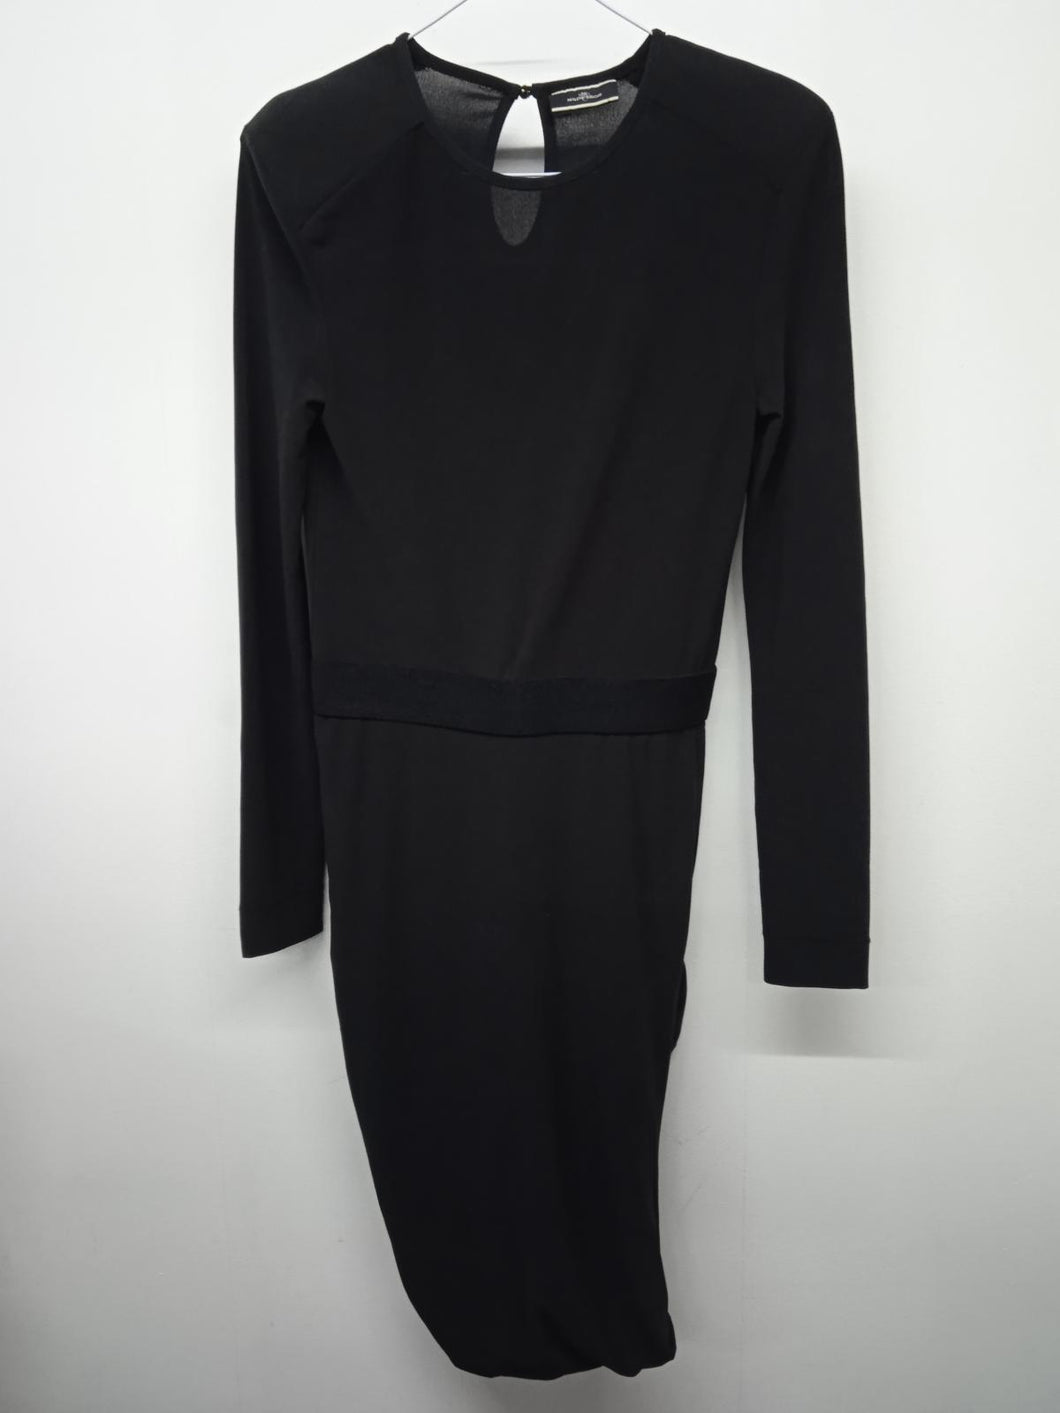 MALENE BIRGER Ladies Black Dresses Long Sleeve Round Neck Fitted Formal UKXS